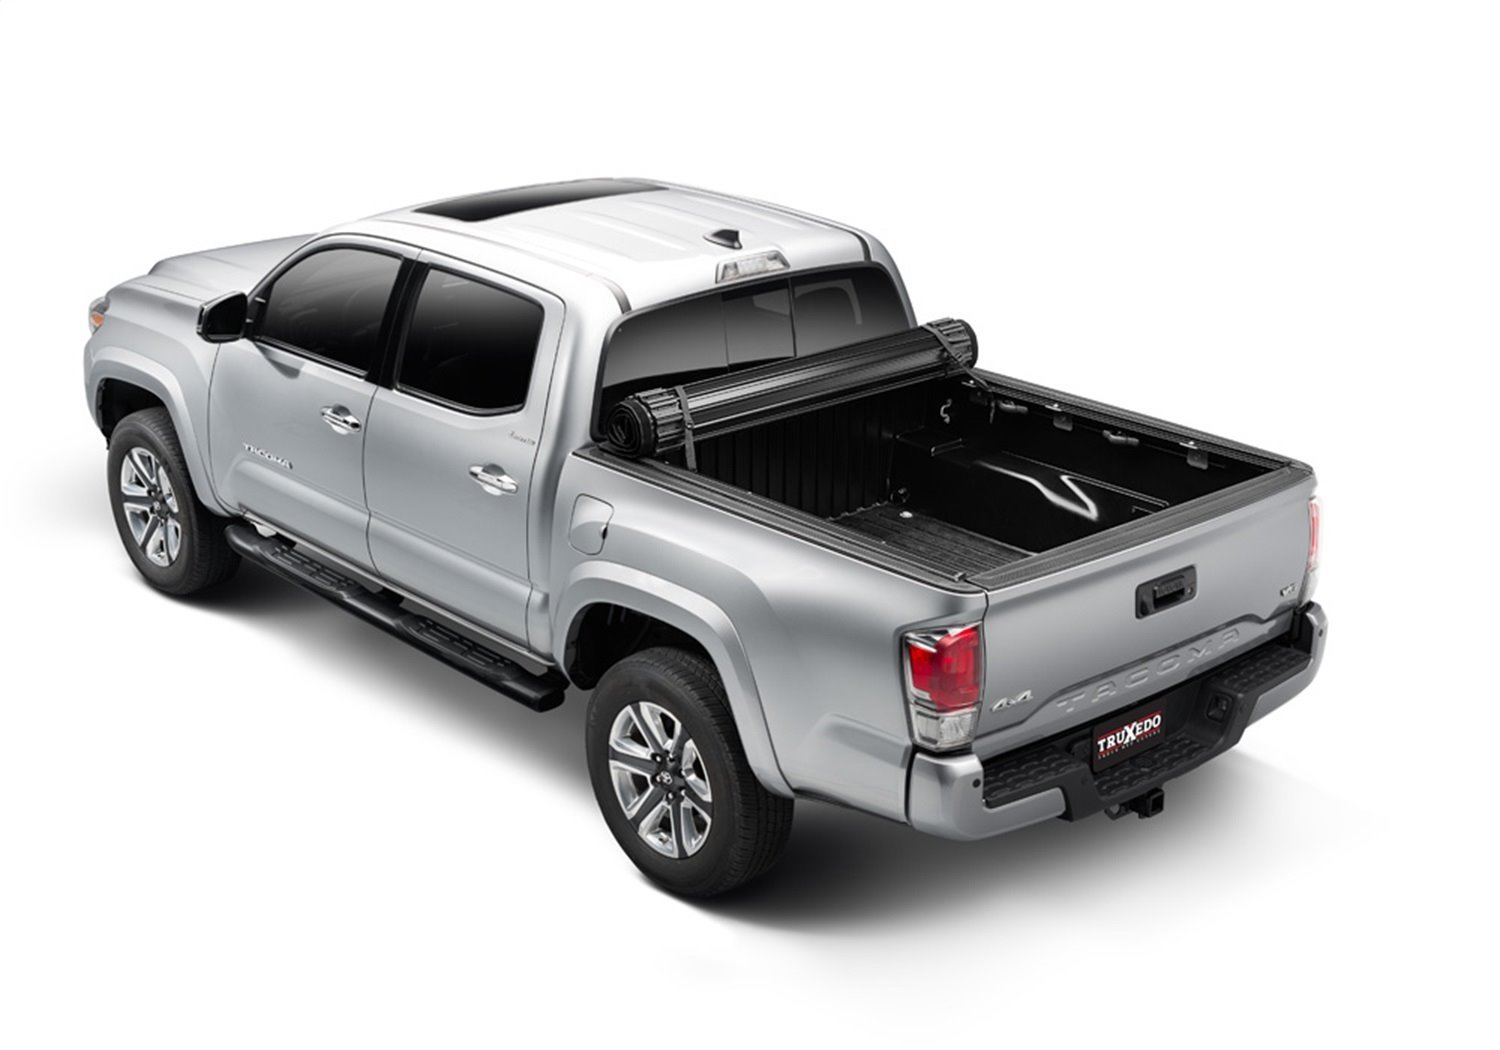 Sentry CT Roll-Up Tonneau Cover Fits Select Toyota